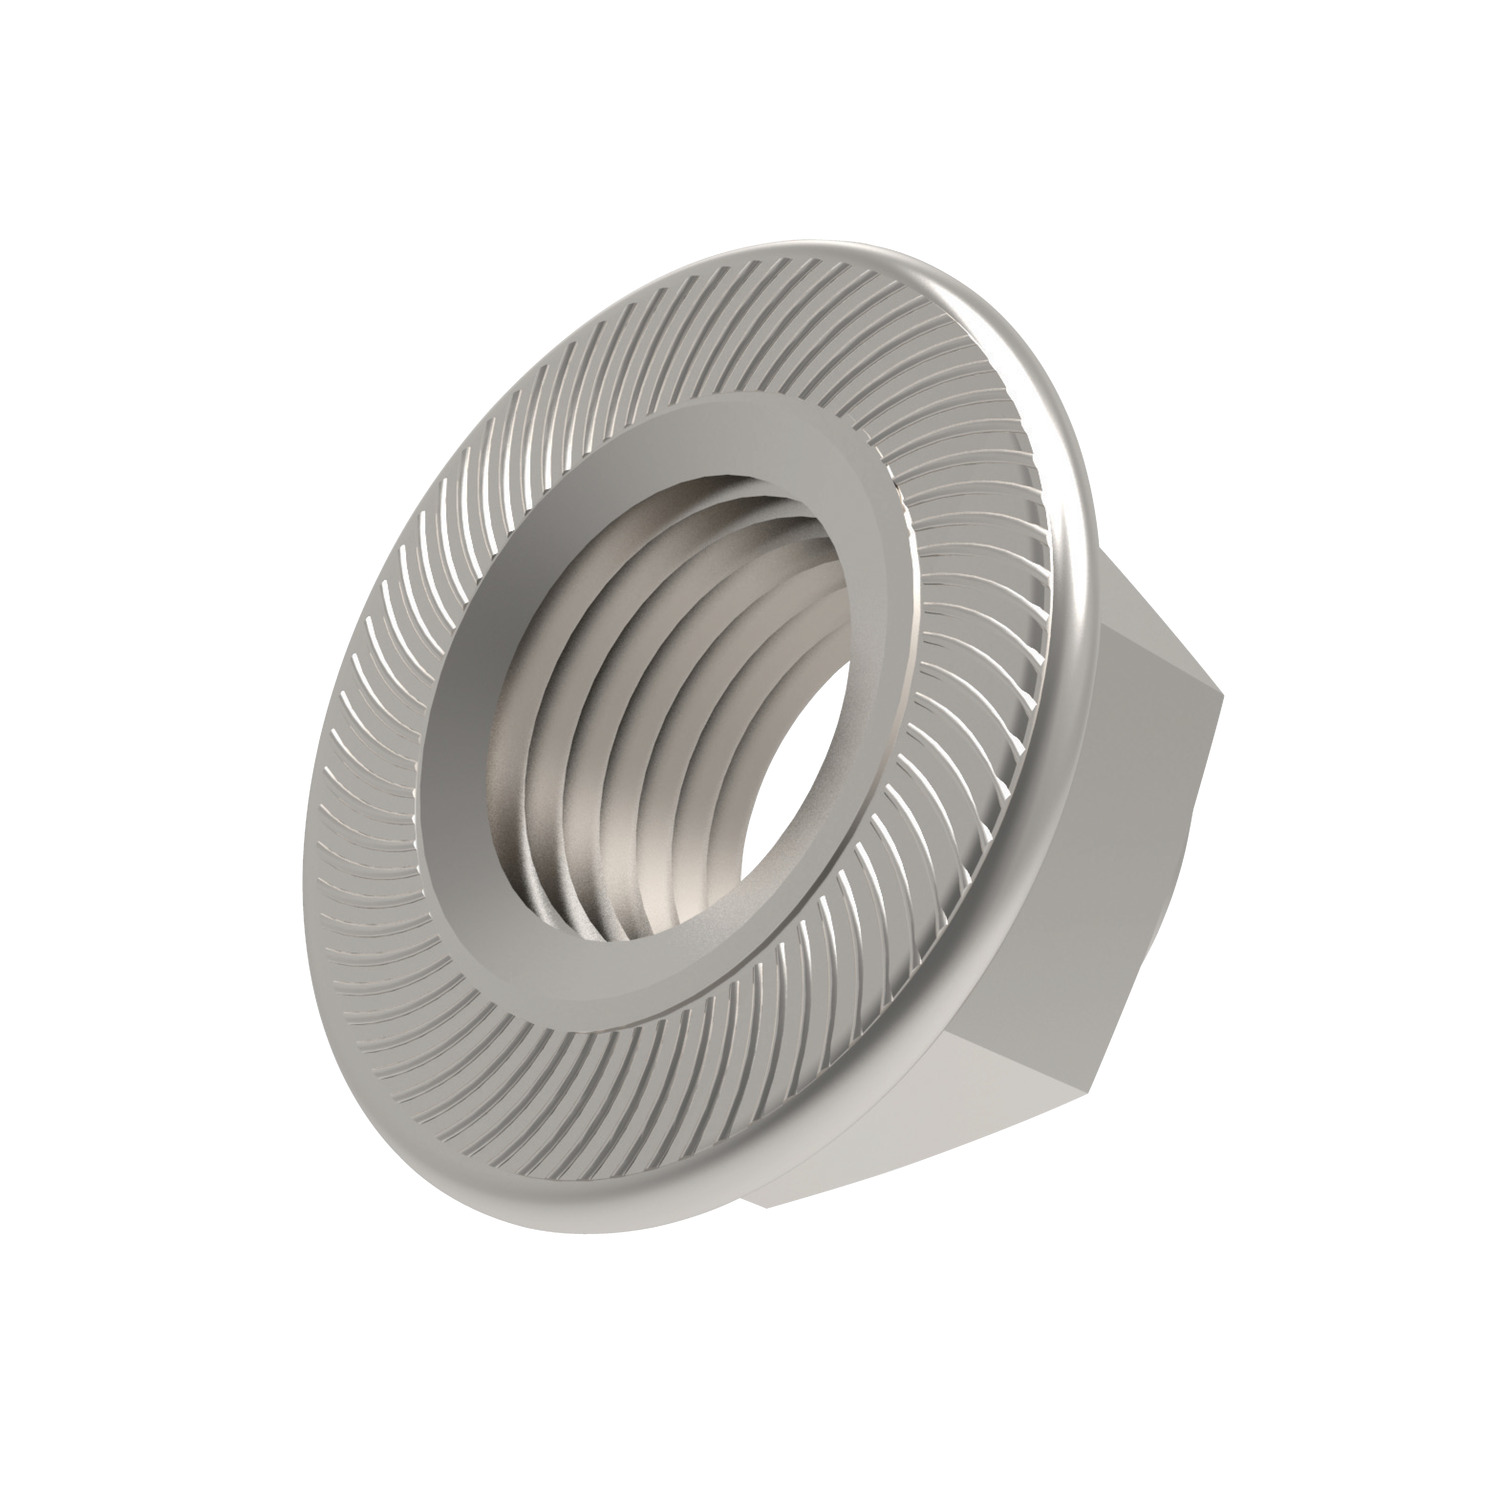 P0309.030-A2 Serrated Flanged Nut  M3 A2 s/s DIN 6926